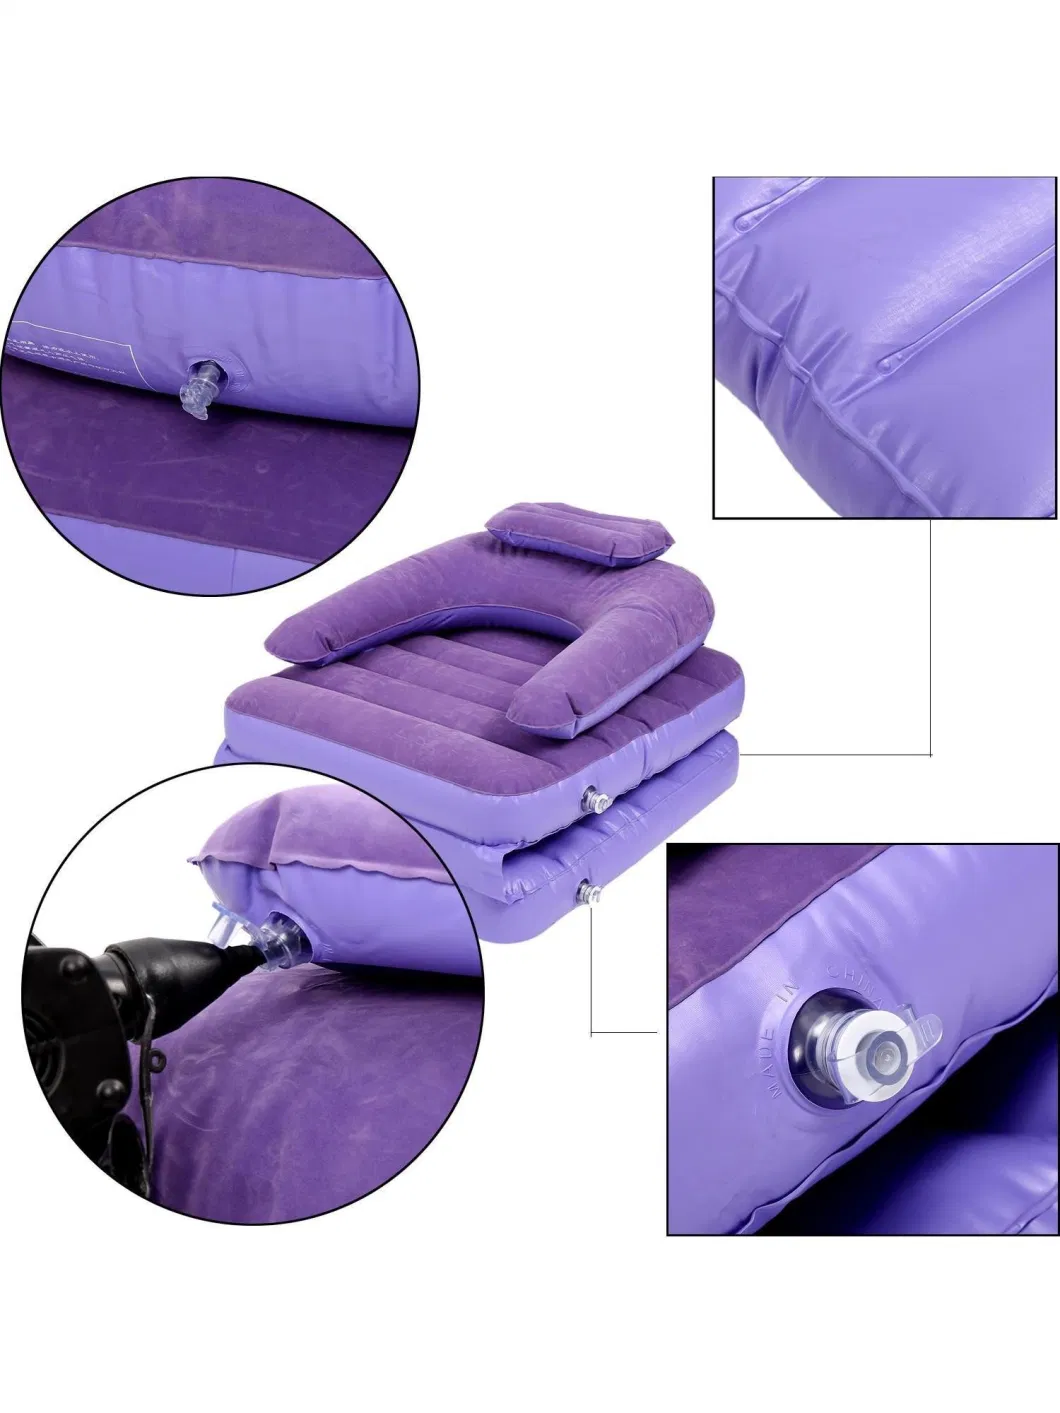 Portable Foldable Single Flocked Inflatable Air Bed Mattress Outdoor Camping Bed